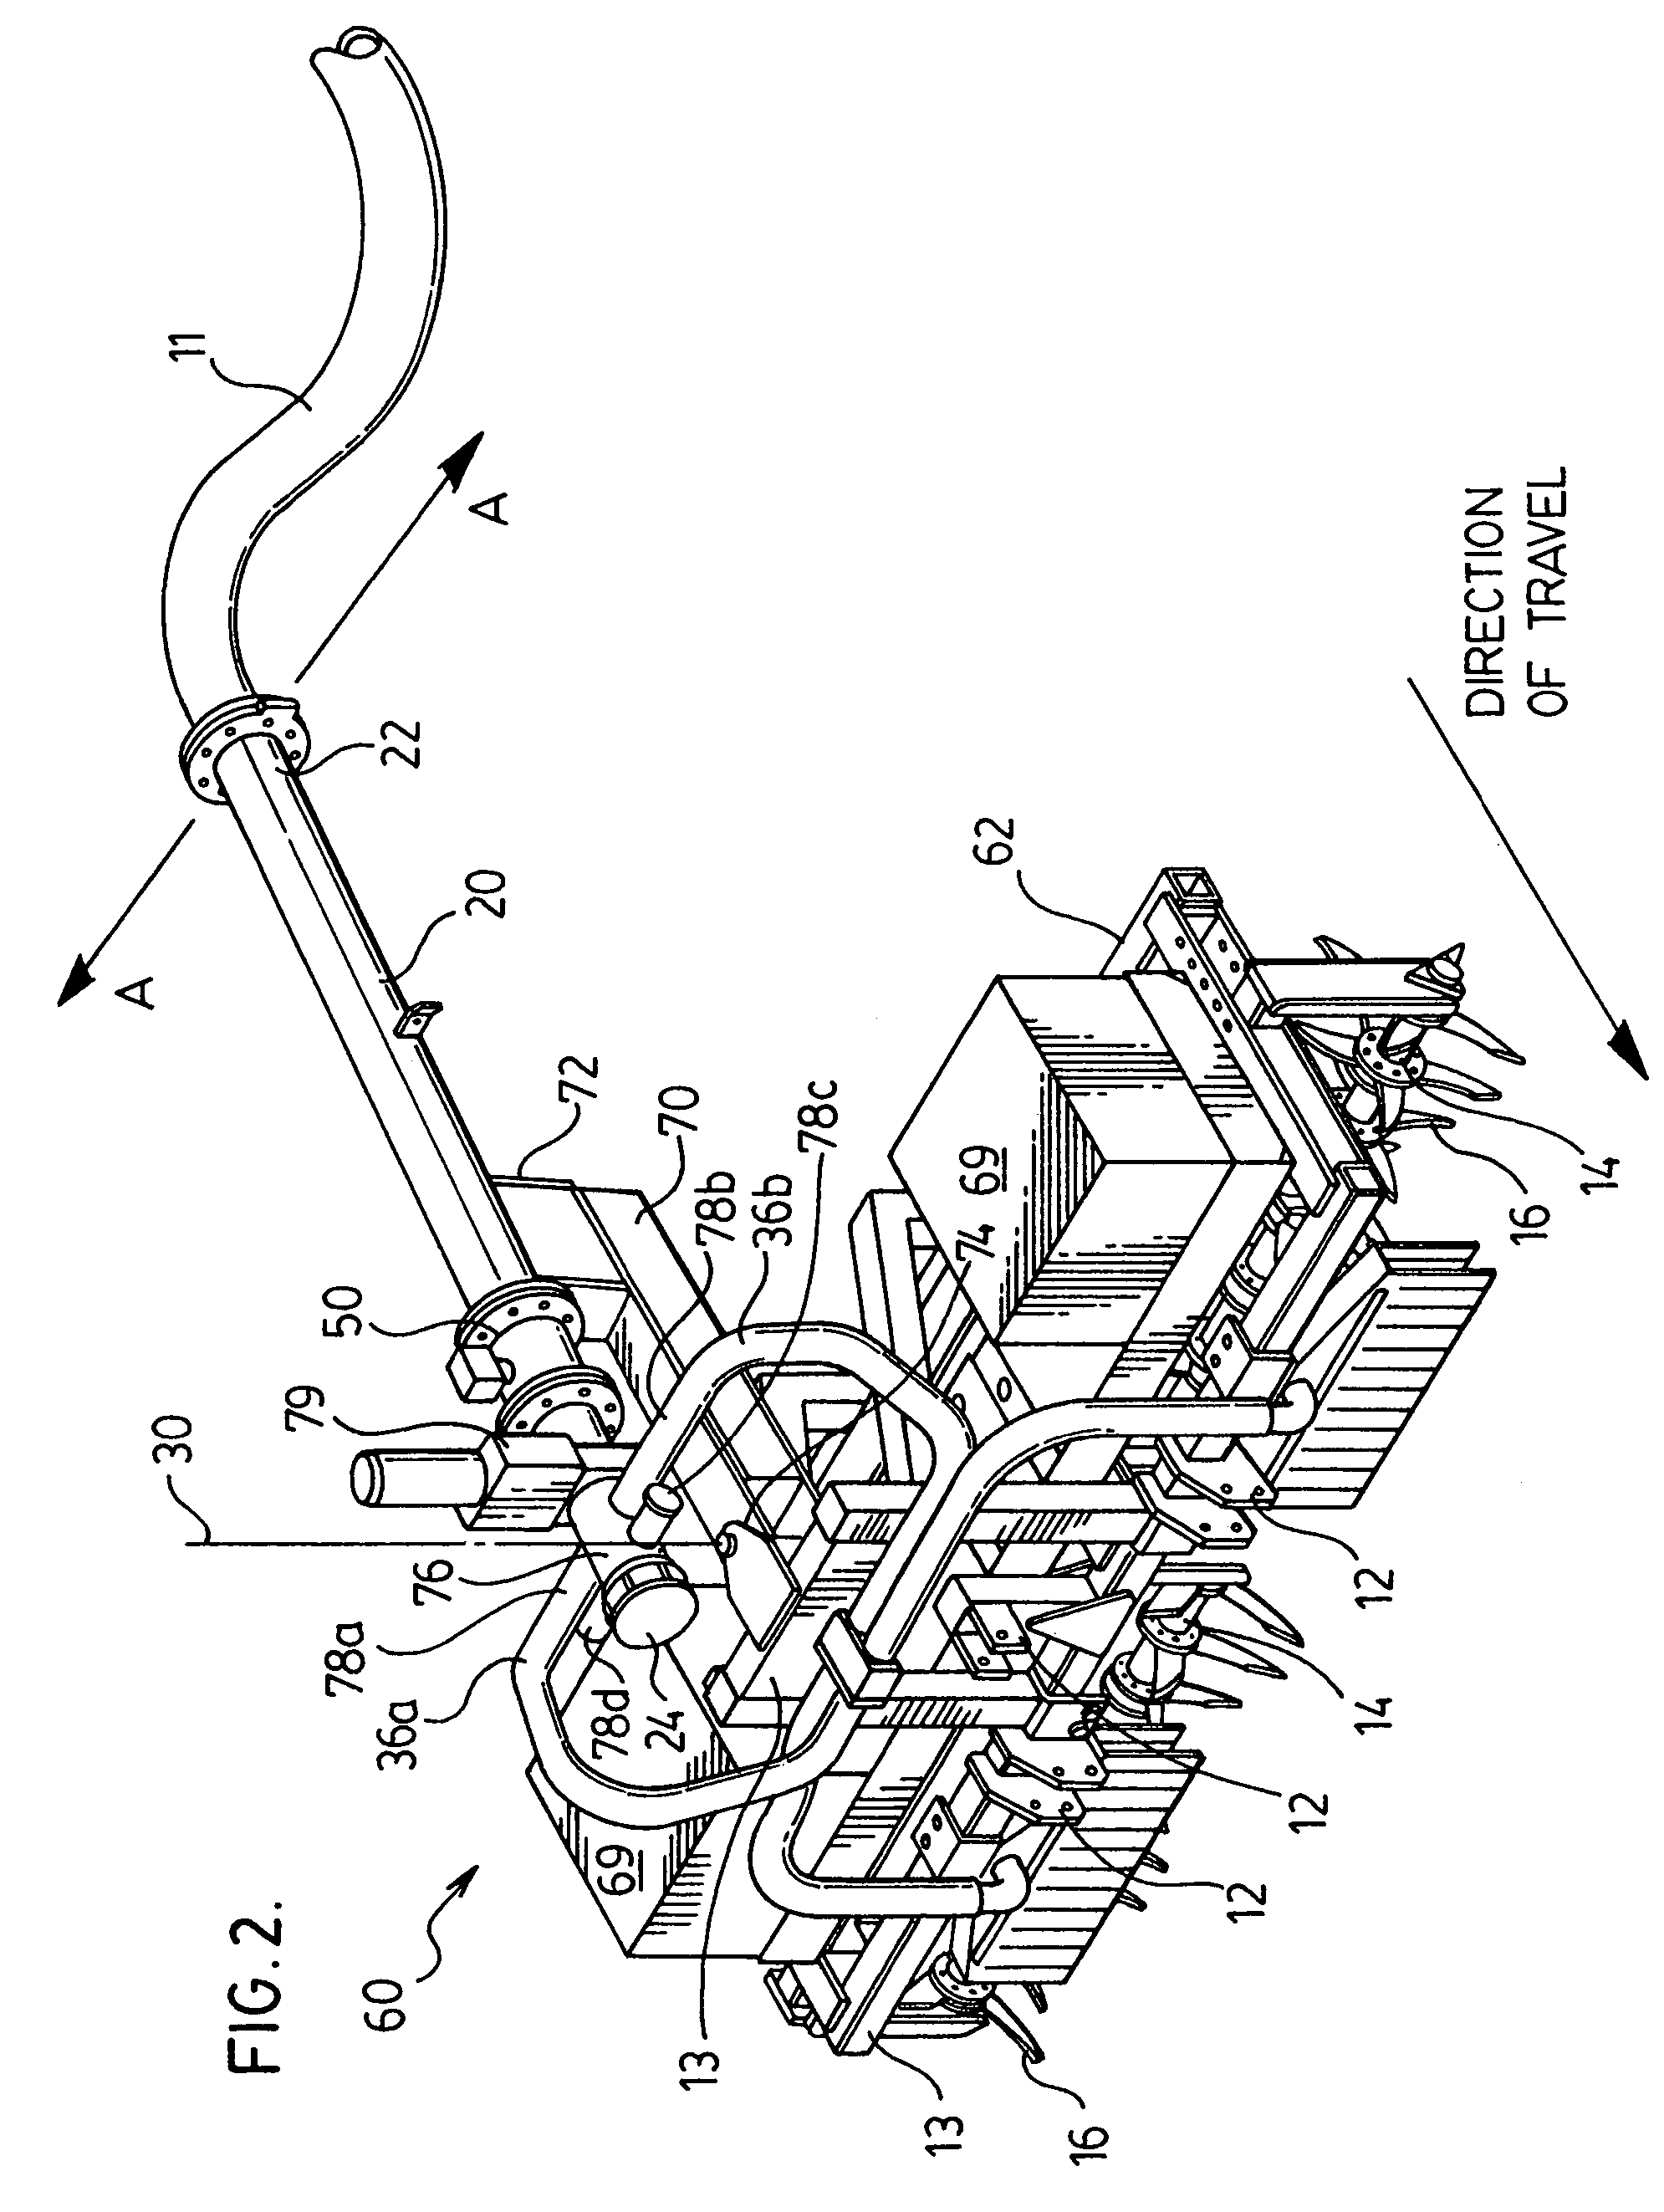 Apparatus for application of liquids or liquid-solid dispersions to soil, and a kit to adapt soil aeration or tillage devices to further supply liquids or liquid-solid dispersions to soil